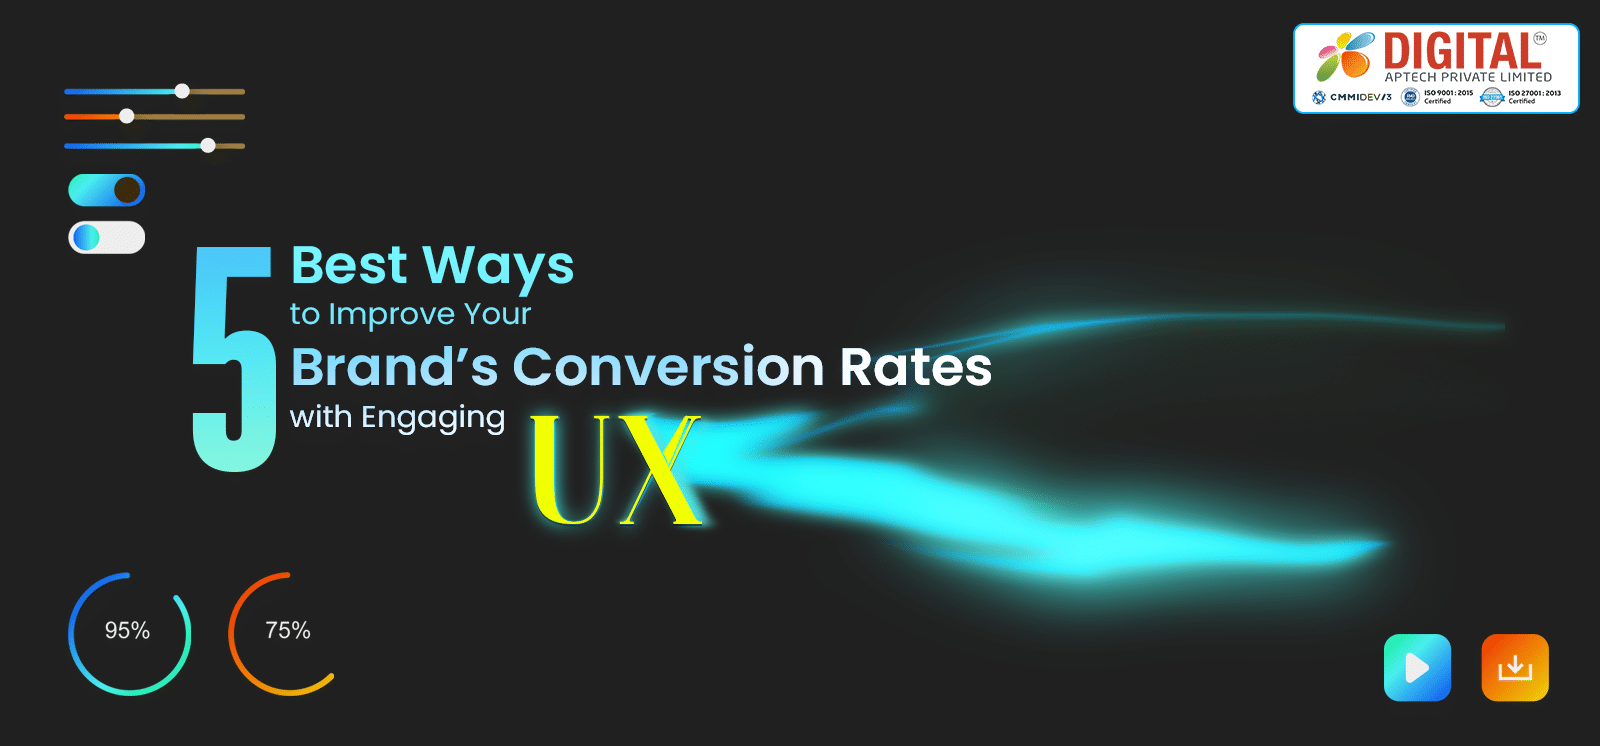 5 Best Ways to Improve Your Brand’s Conversion Rates with Engaging UX